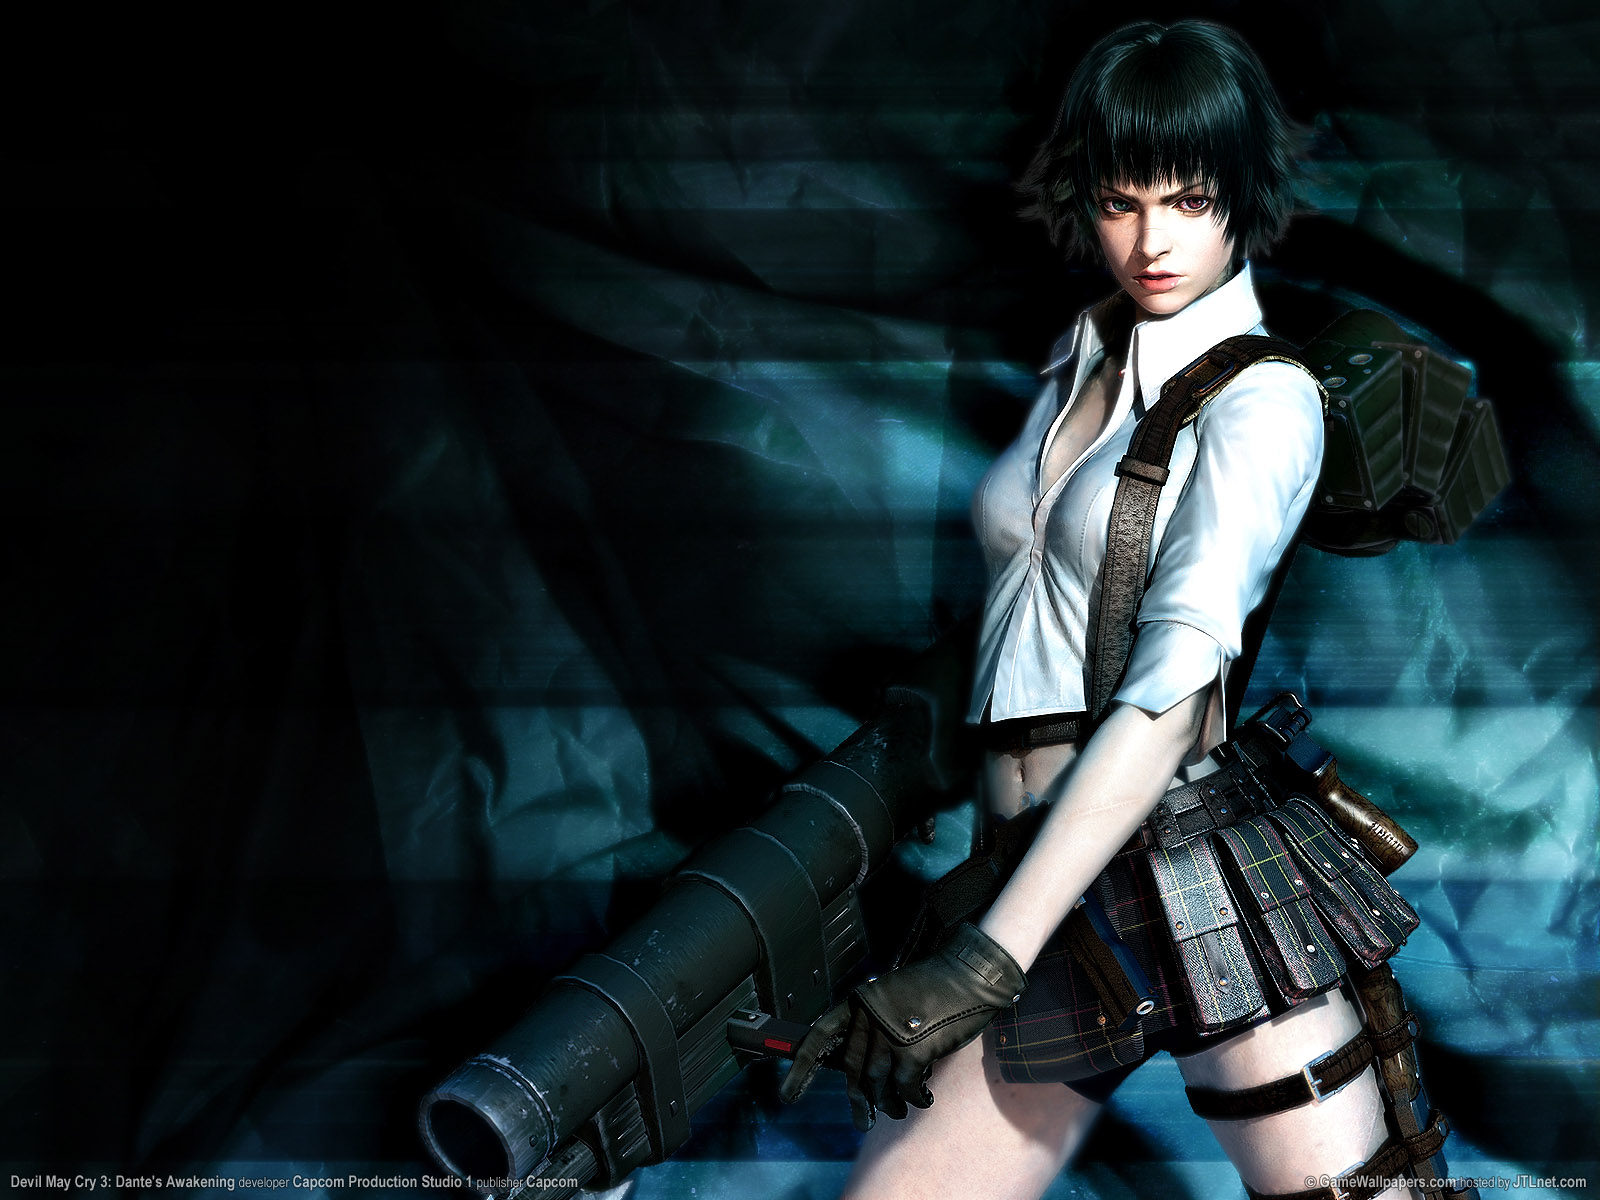 ... hd wallpapers devil may cry hd wallpapers devil may cry hd wallpapers